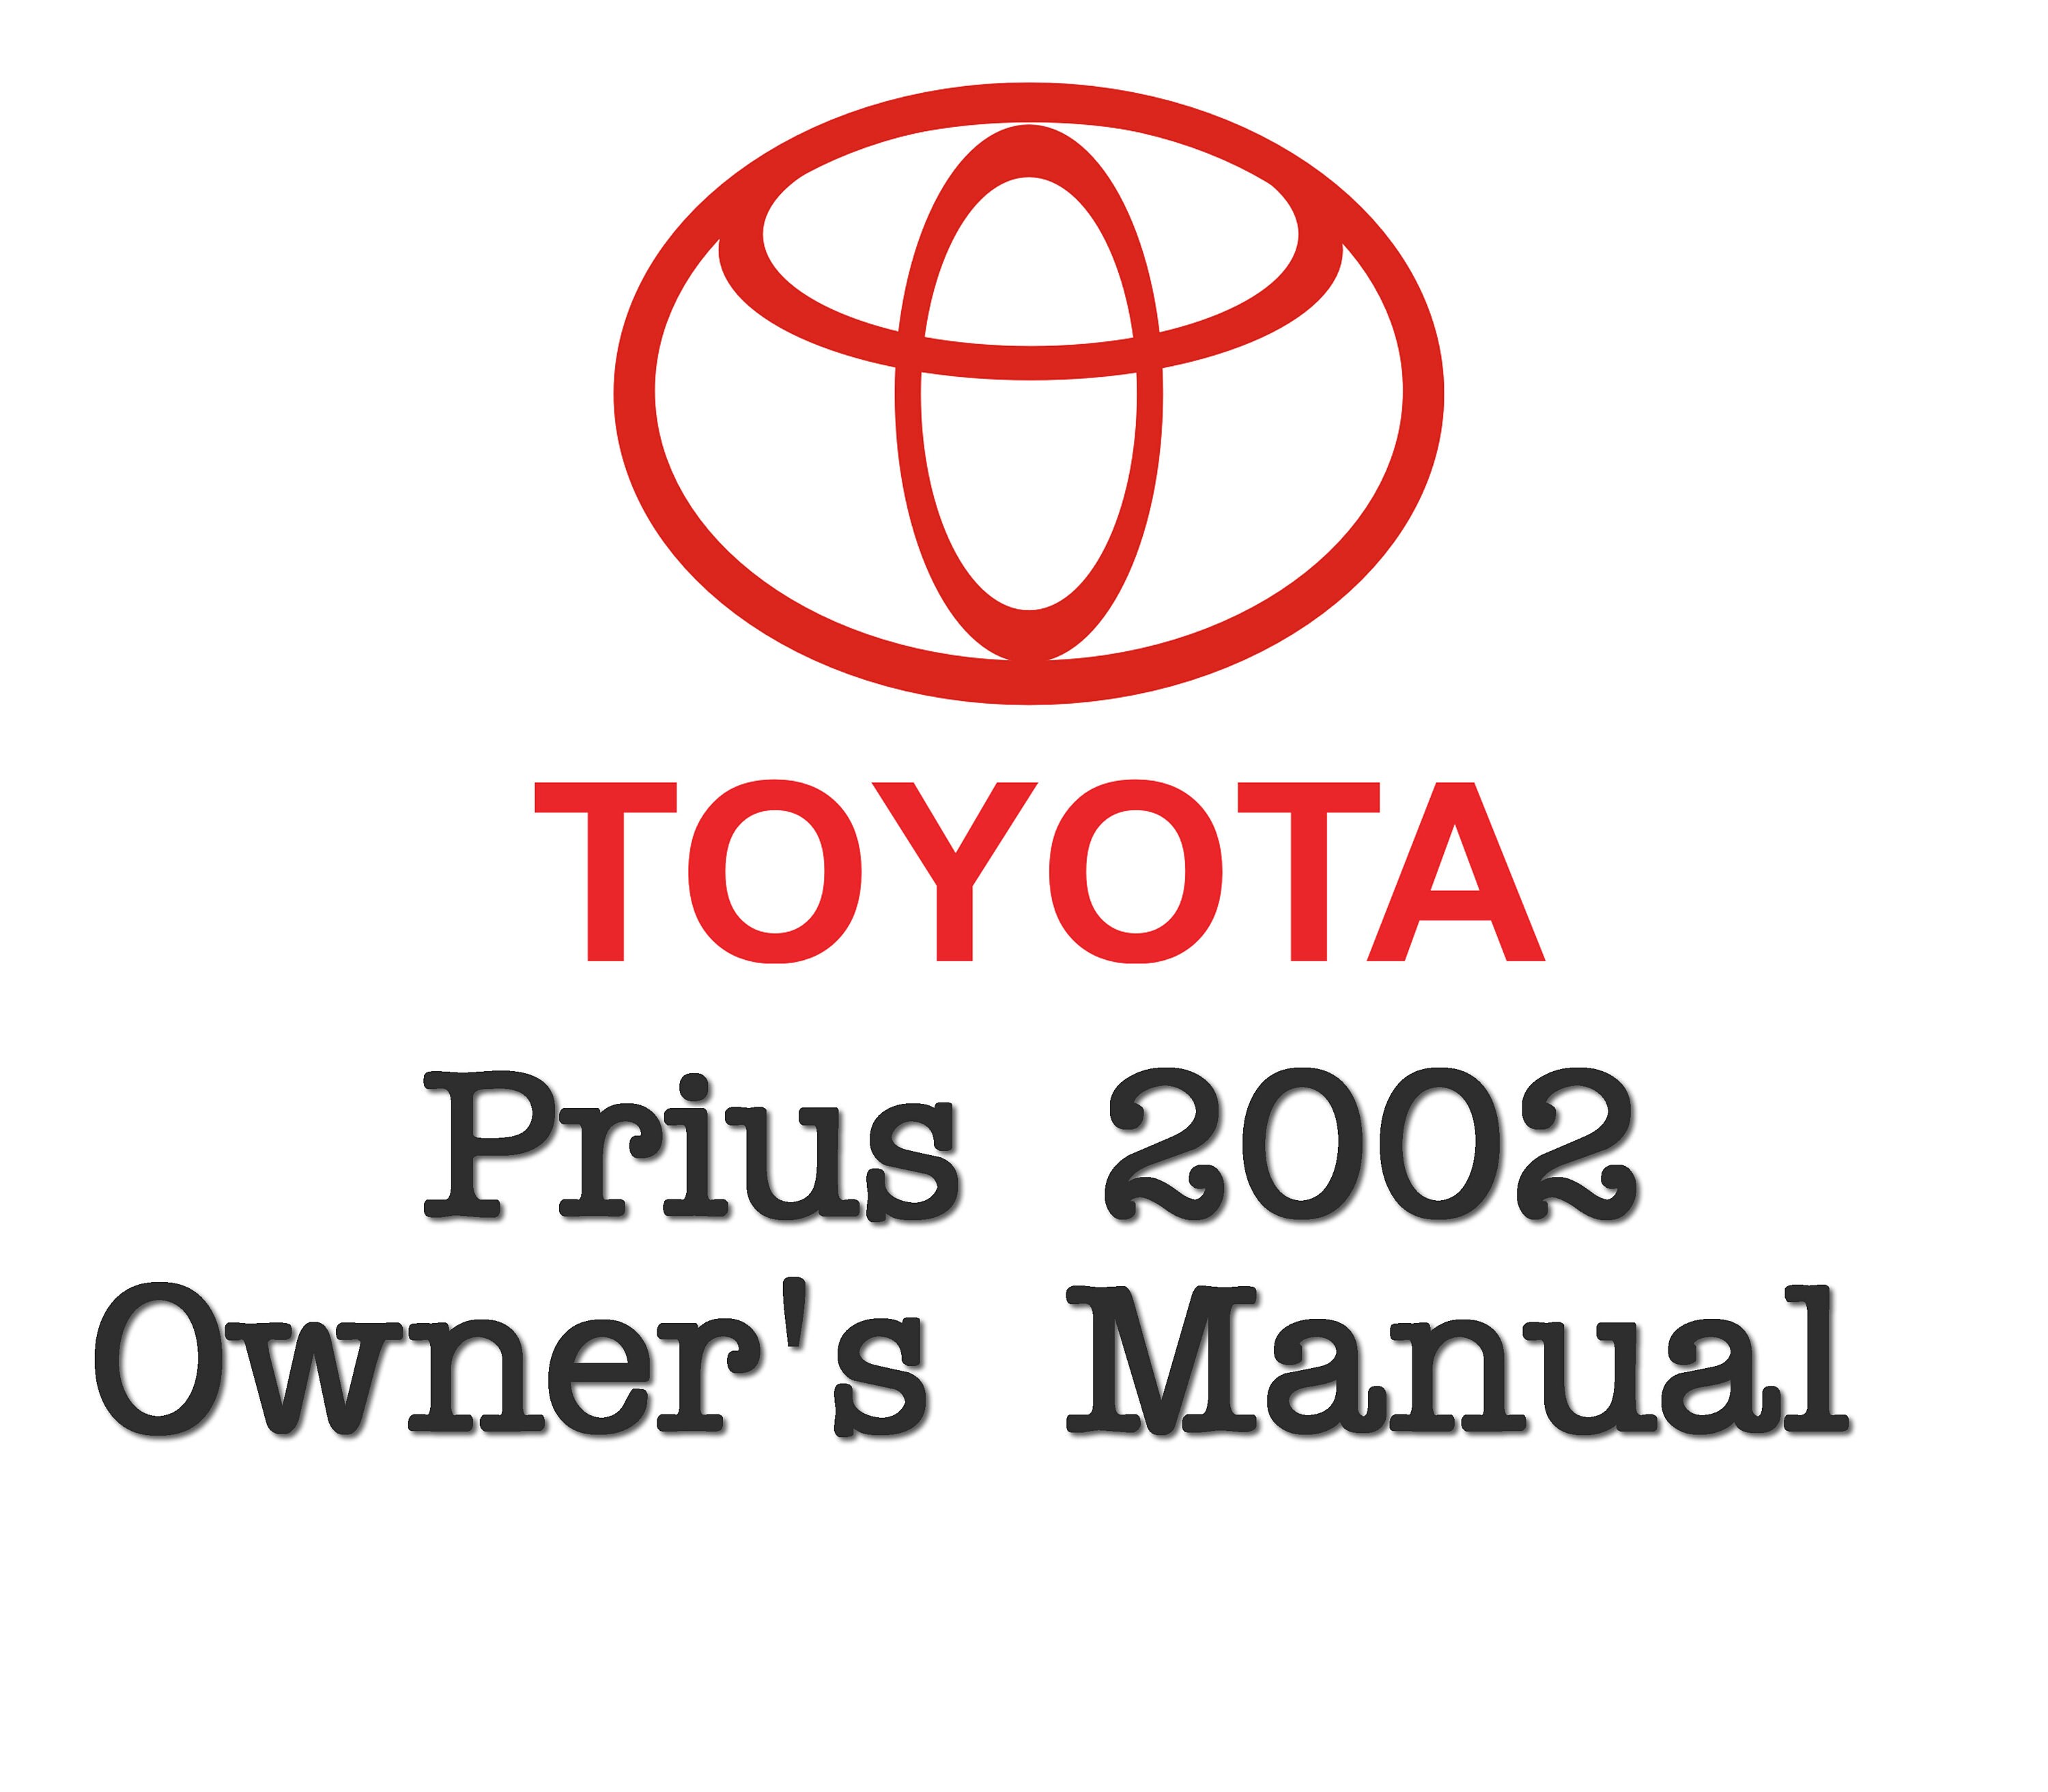 Toyota Prius 2002 owners manual. | Etsy